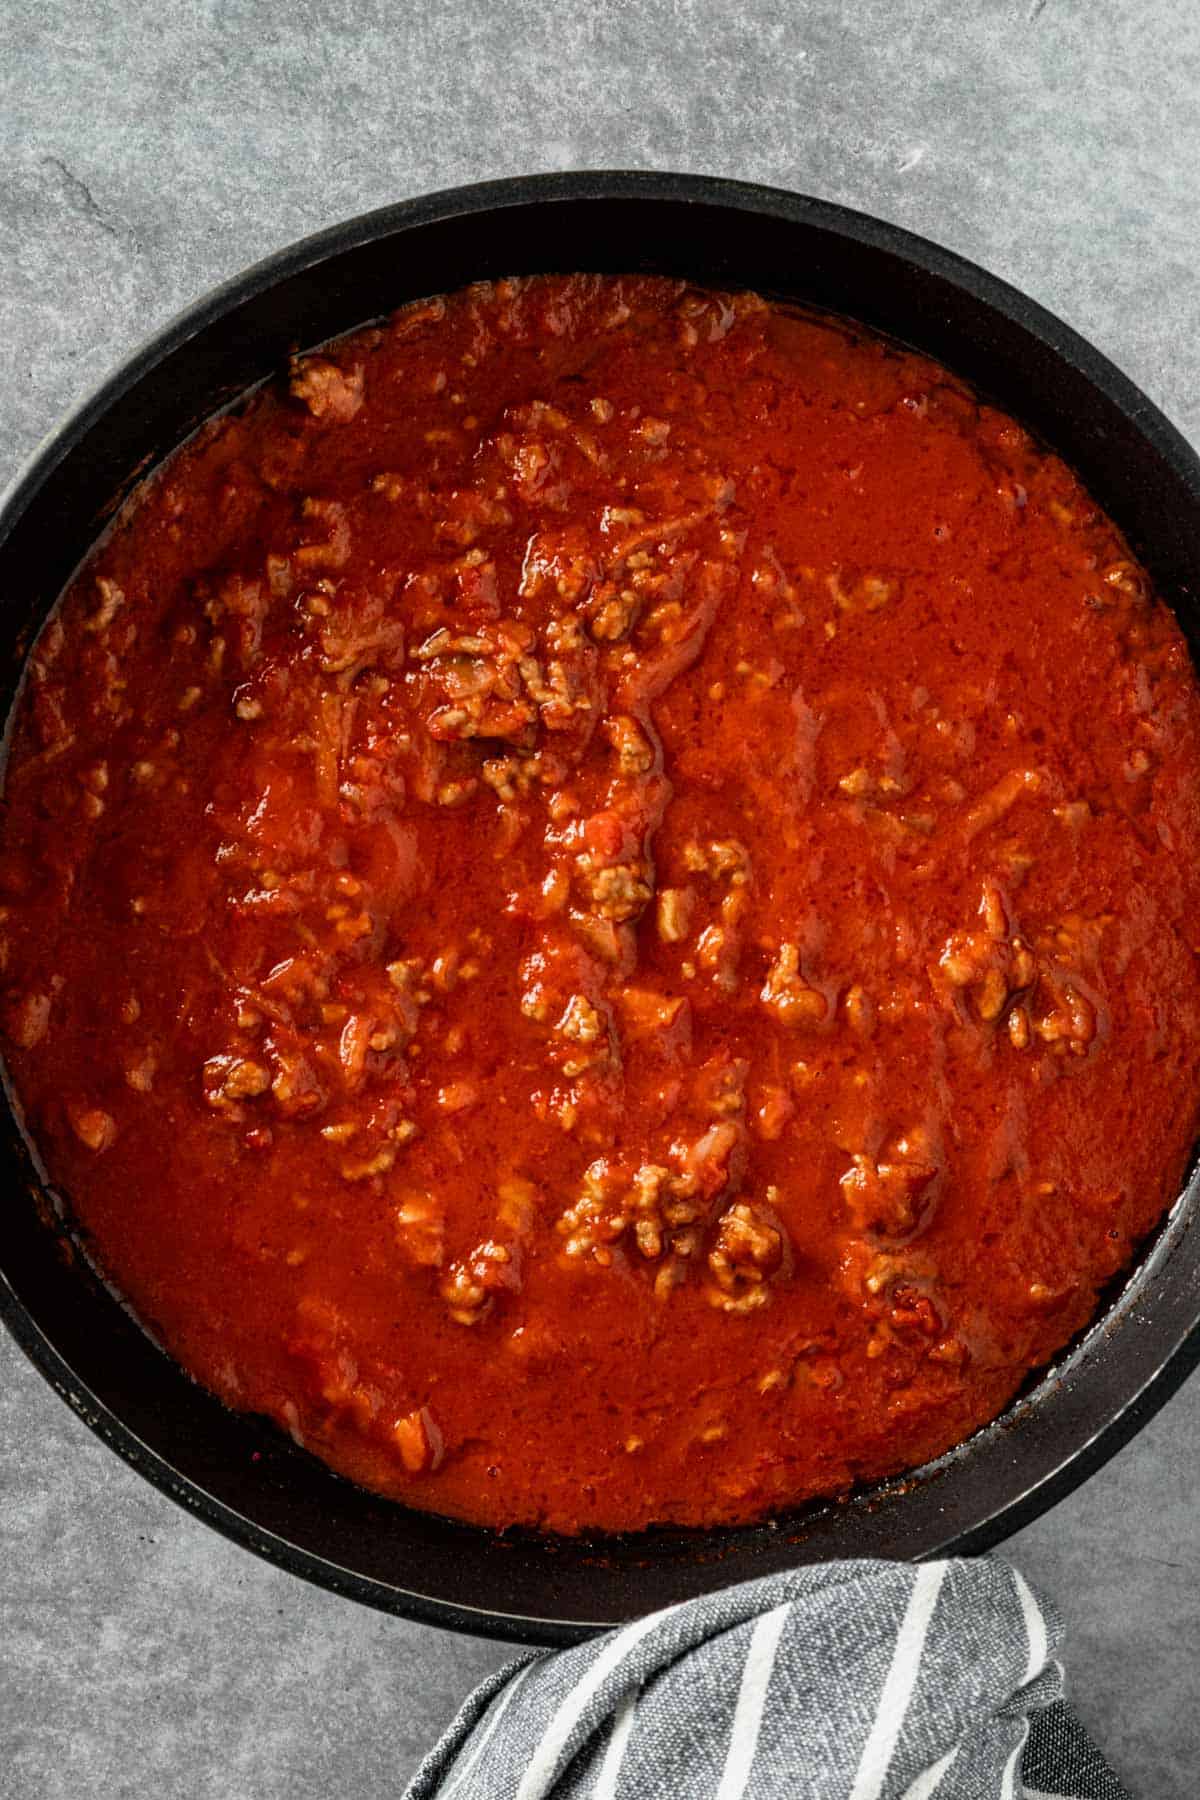 tomatoes added to ground beef mixture in skillet